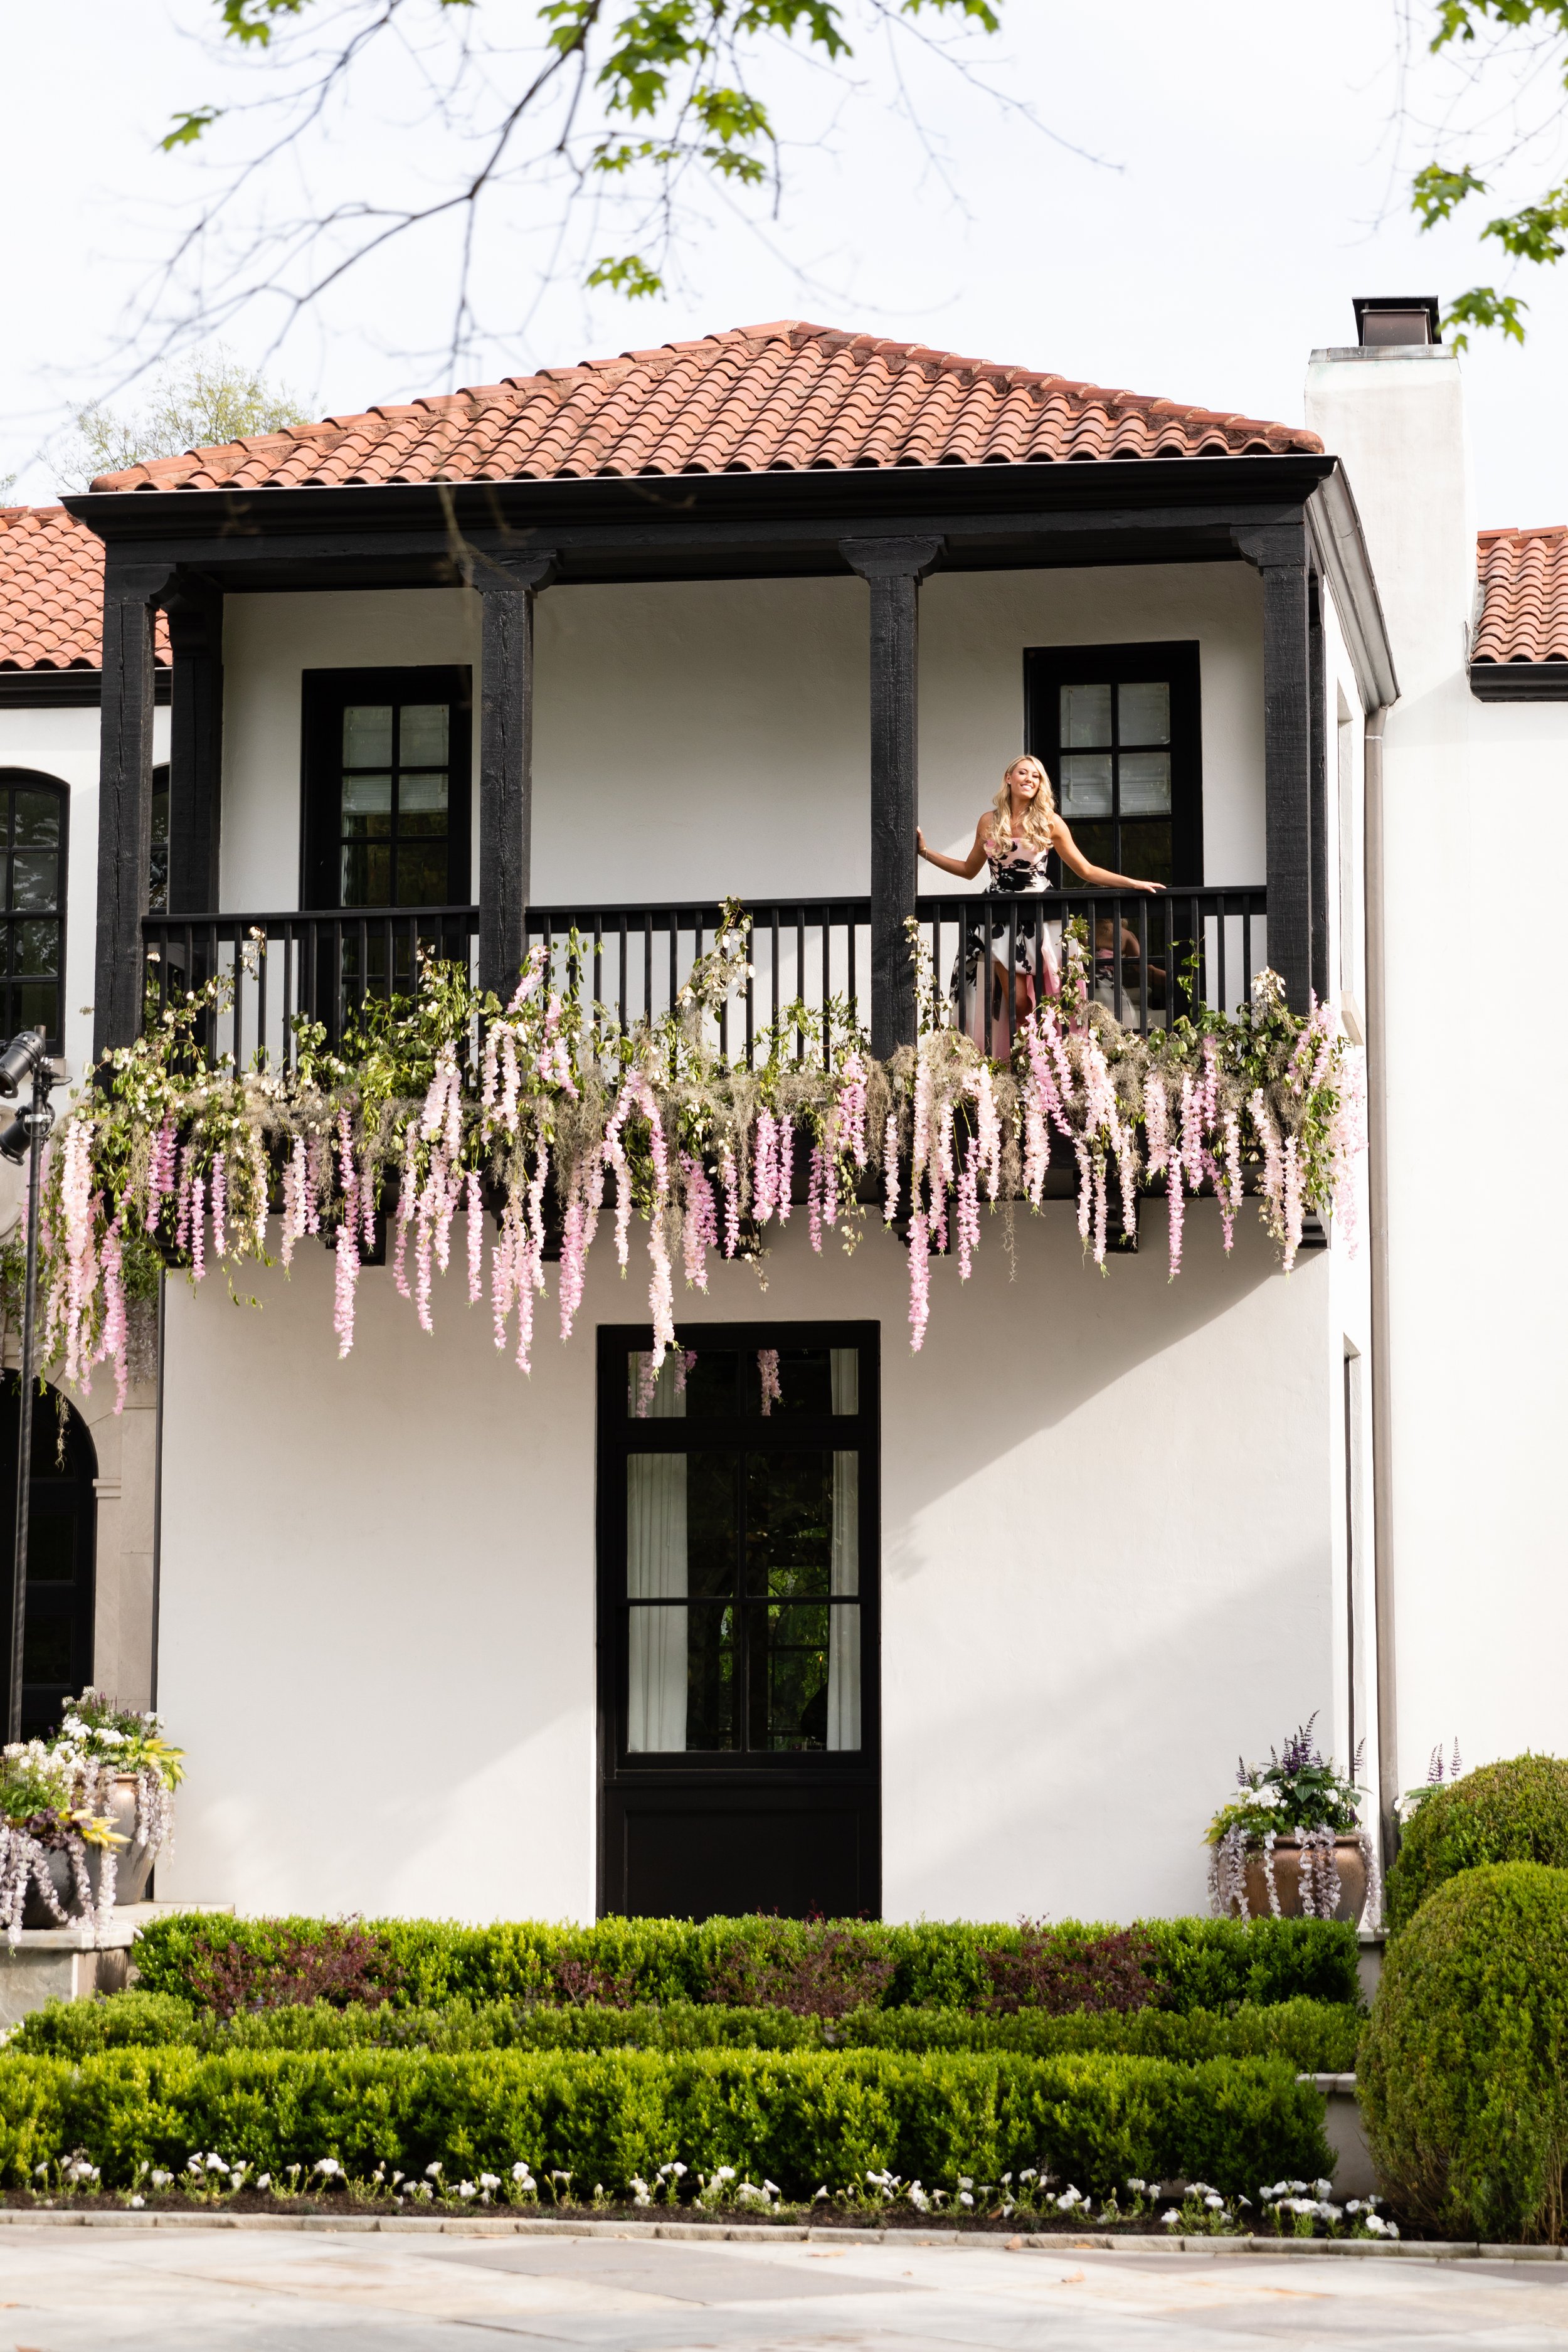 Bridgerton inspired engagement party at a private home in Nashville, TN with lush, organic floral installations of wisteria, spanish moss, and pastel blooms.